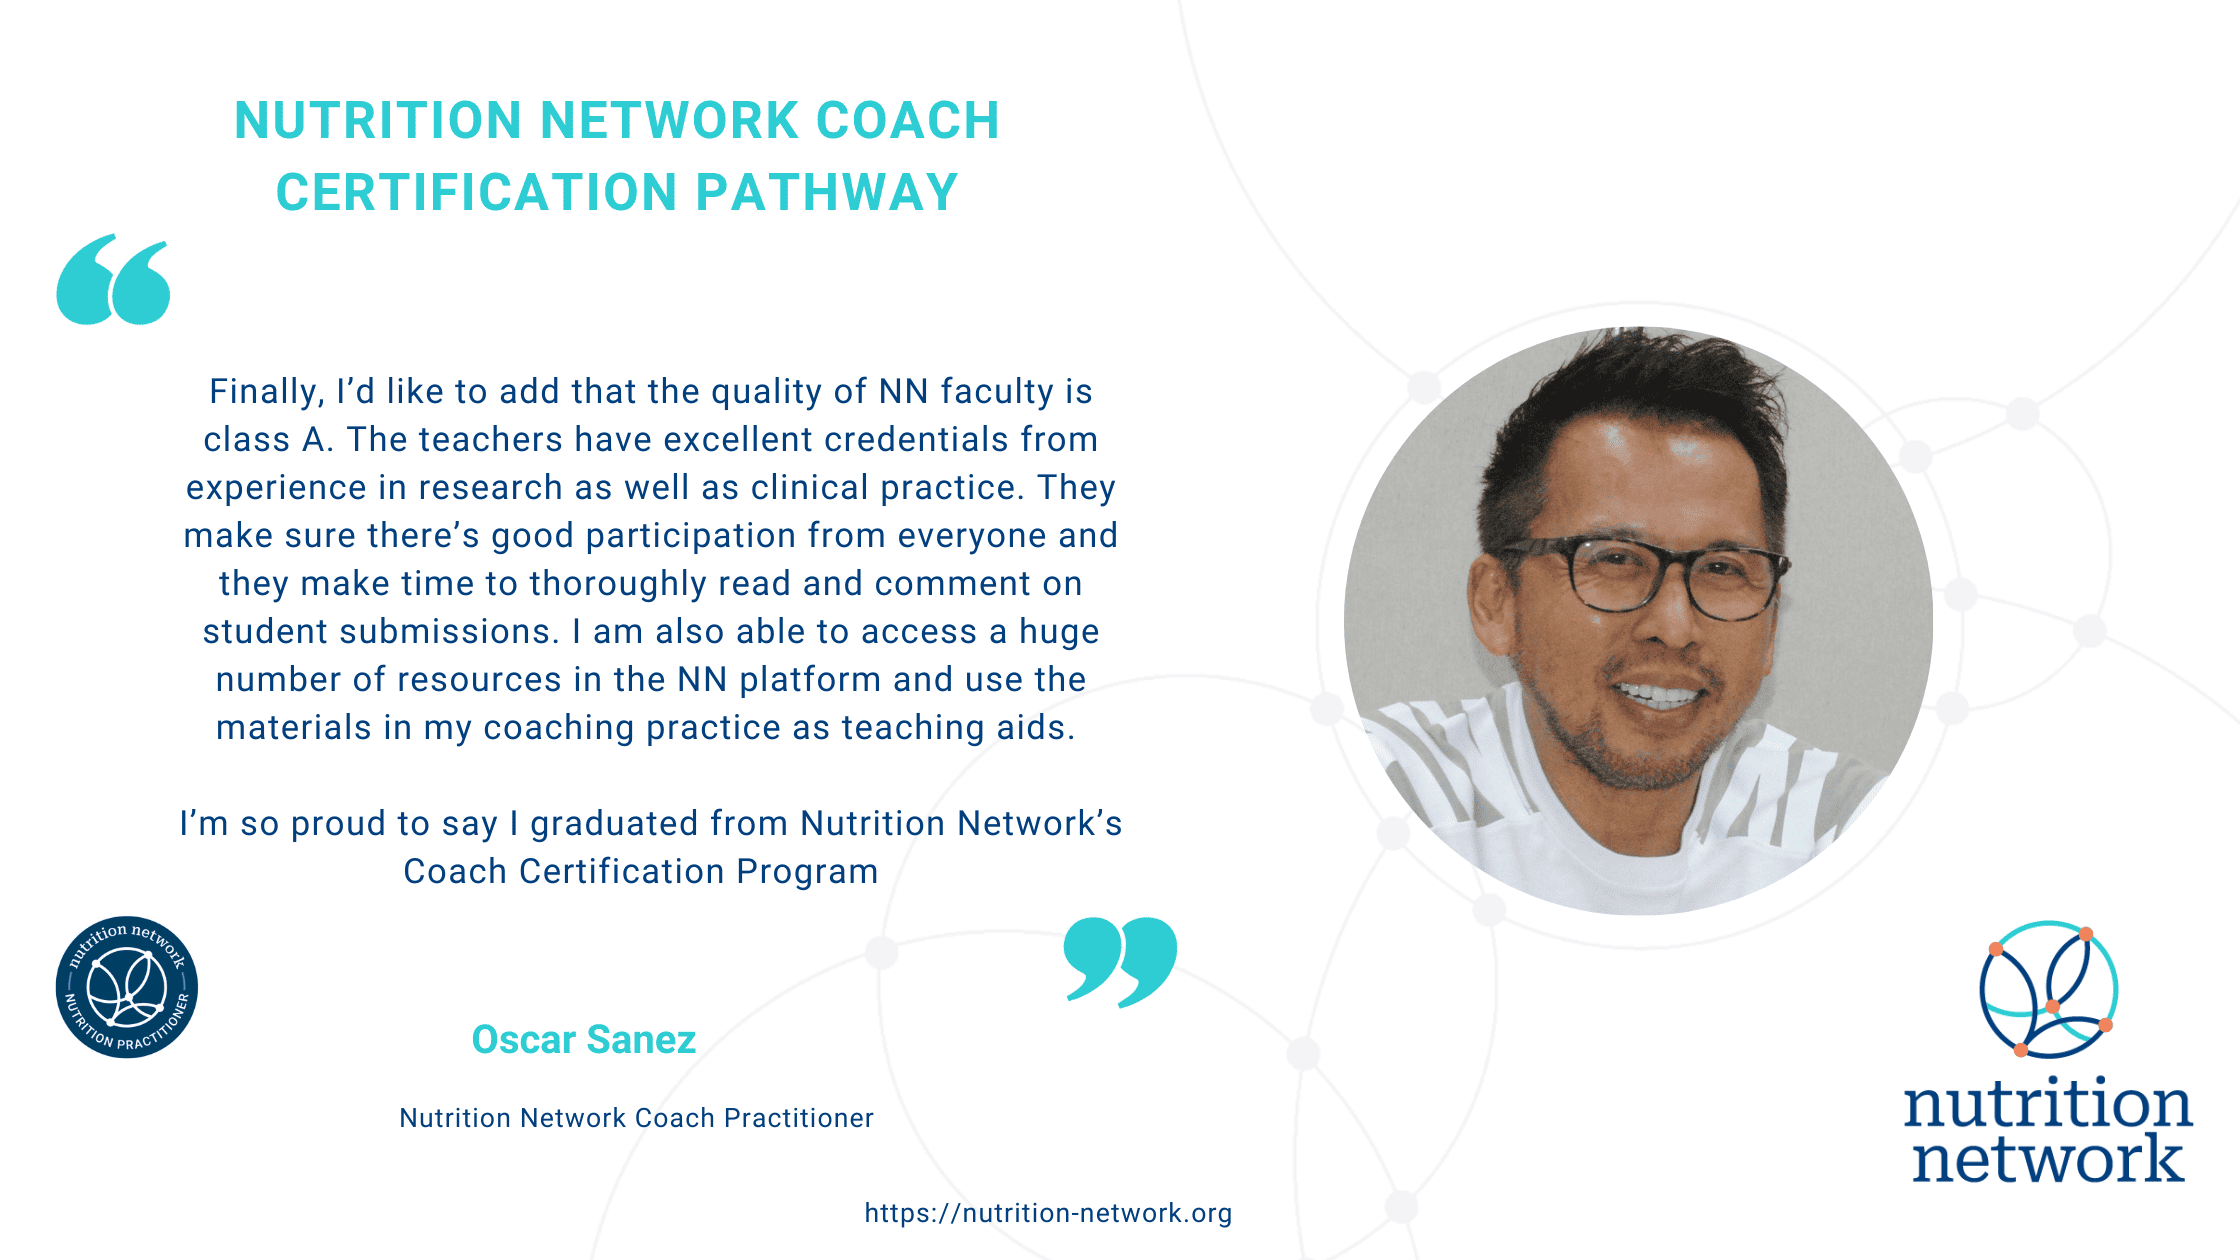 Gearing up for the February 2024 Coach Certification Pathway! See what our Practitioner has to say